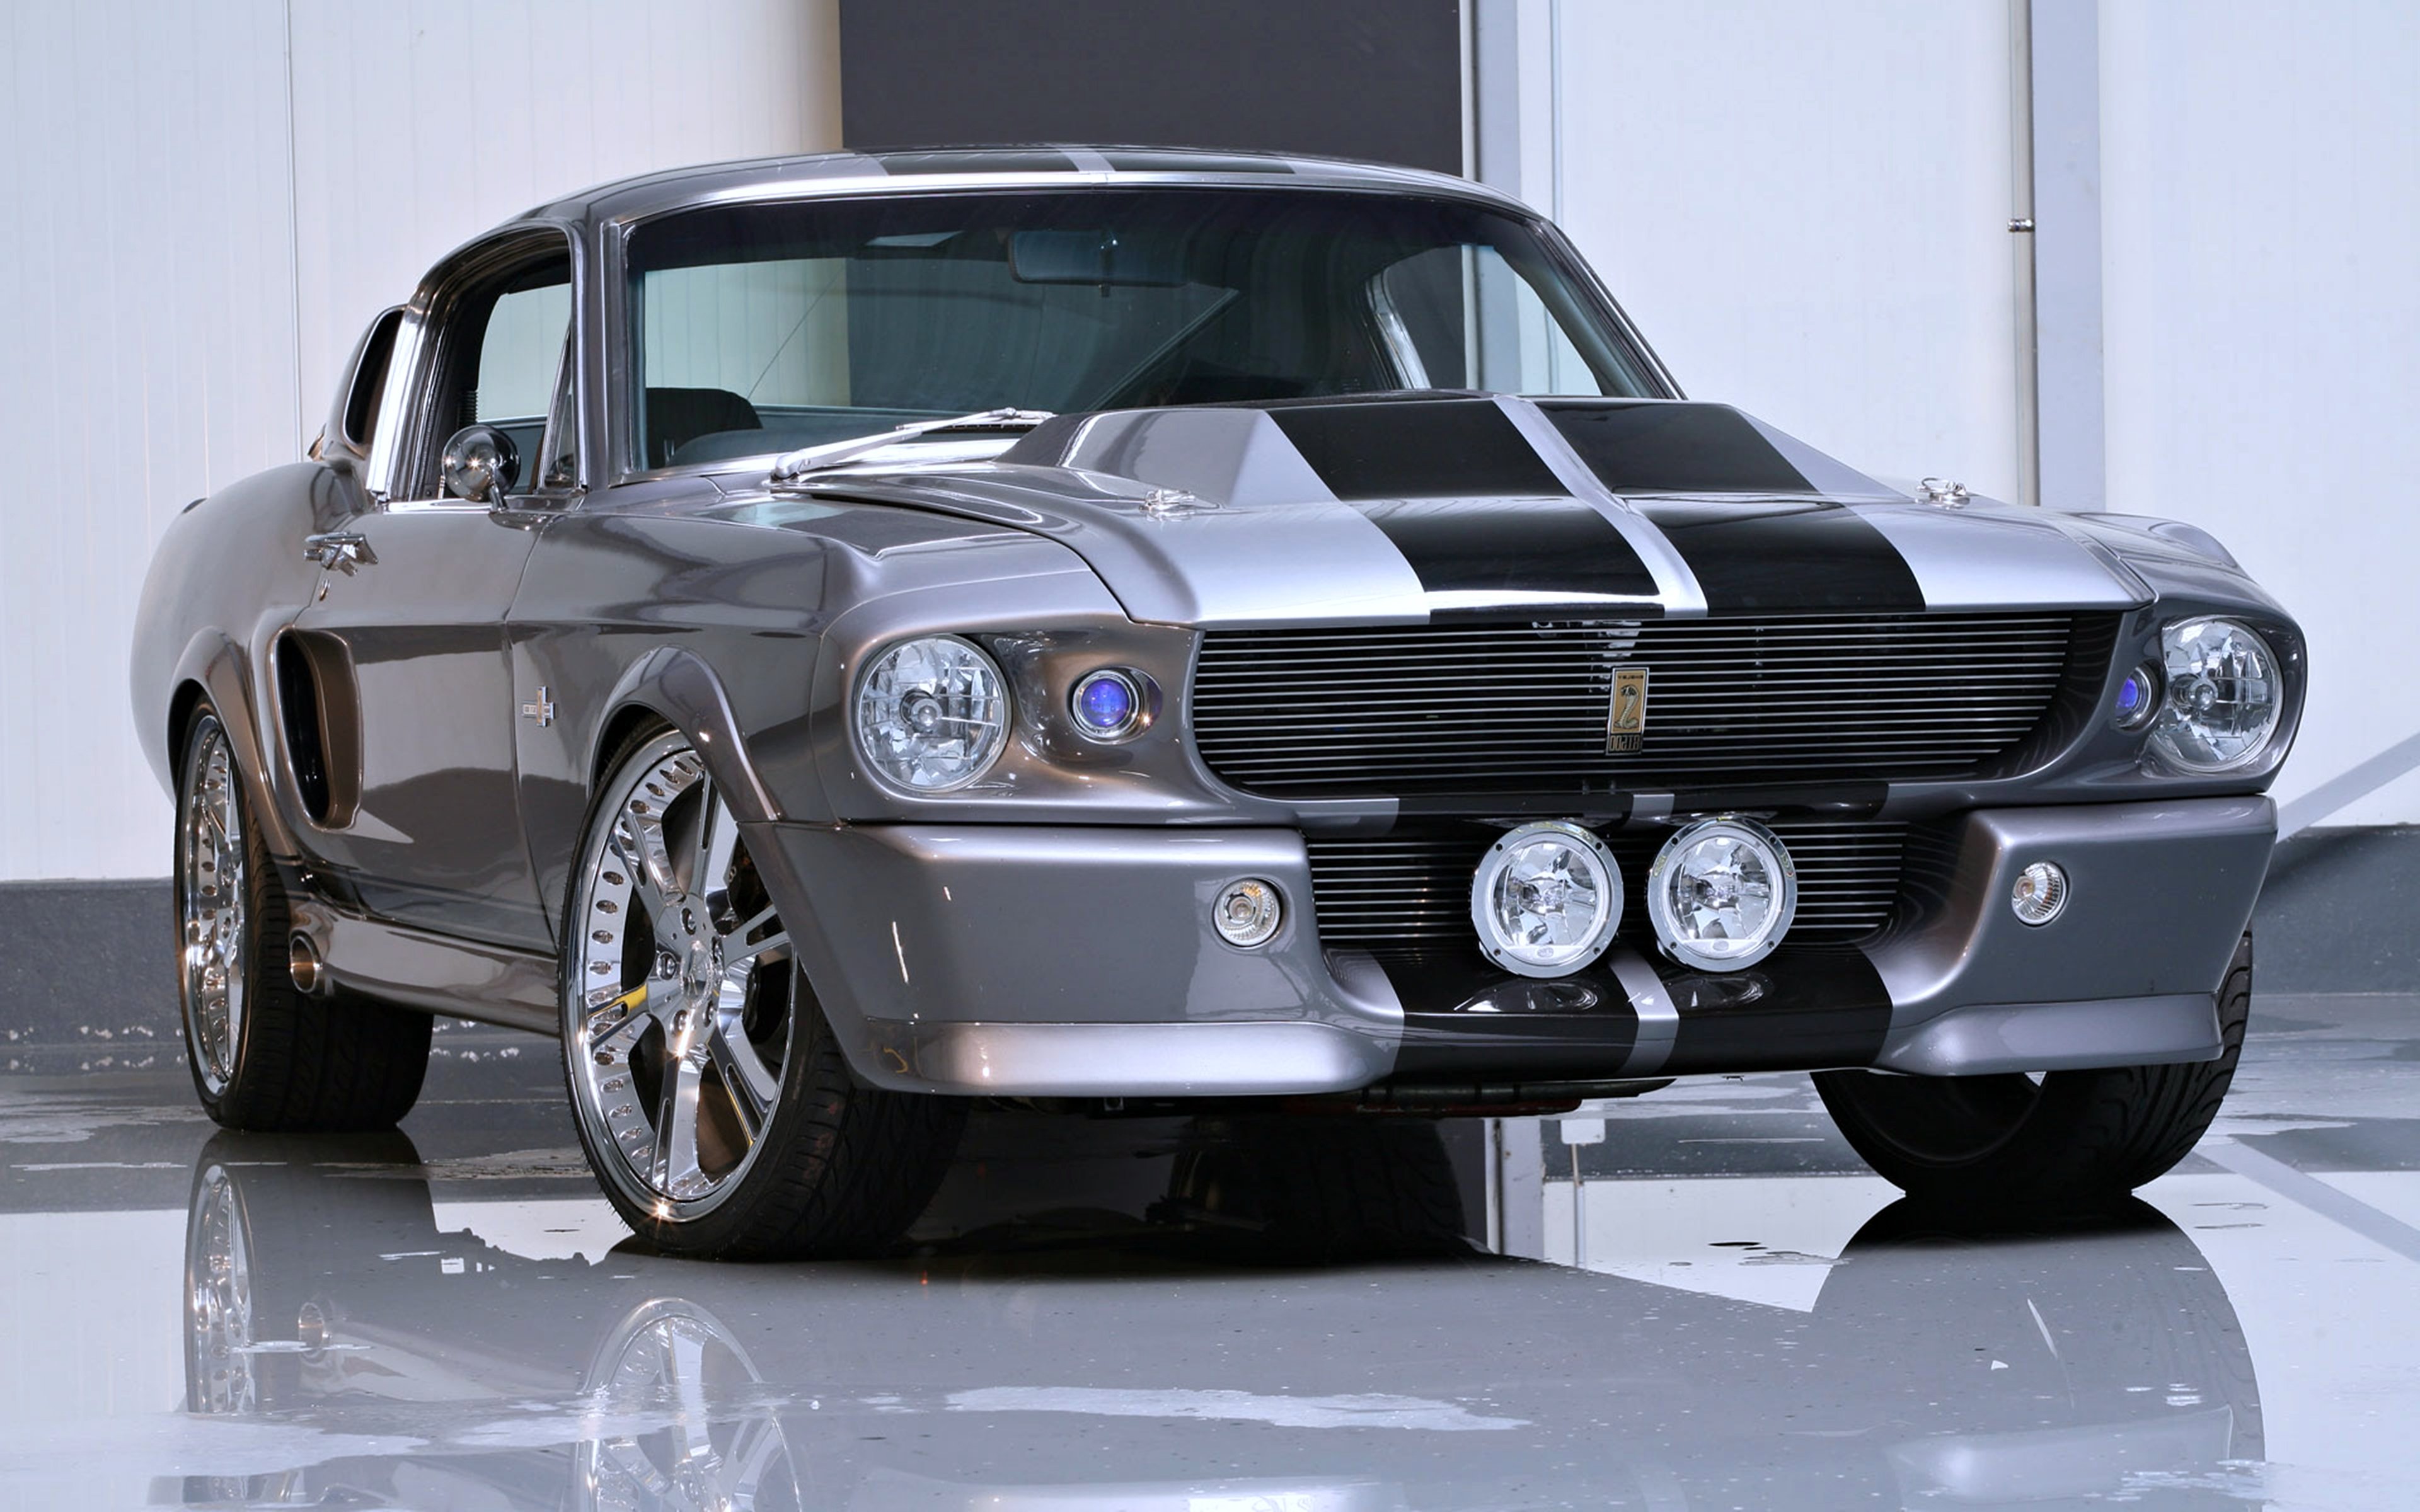 Ford Mustang Shelby Gt500 Eleanor Gray Speed Motors Cars Wallpaper